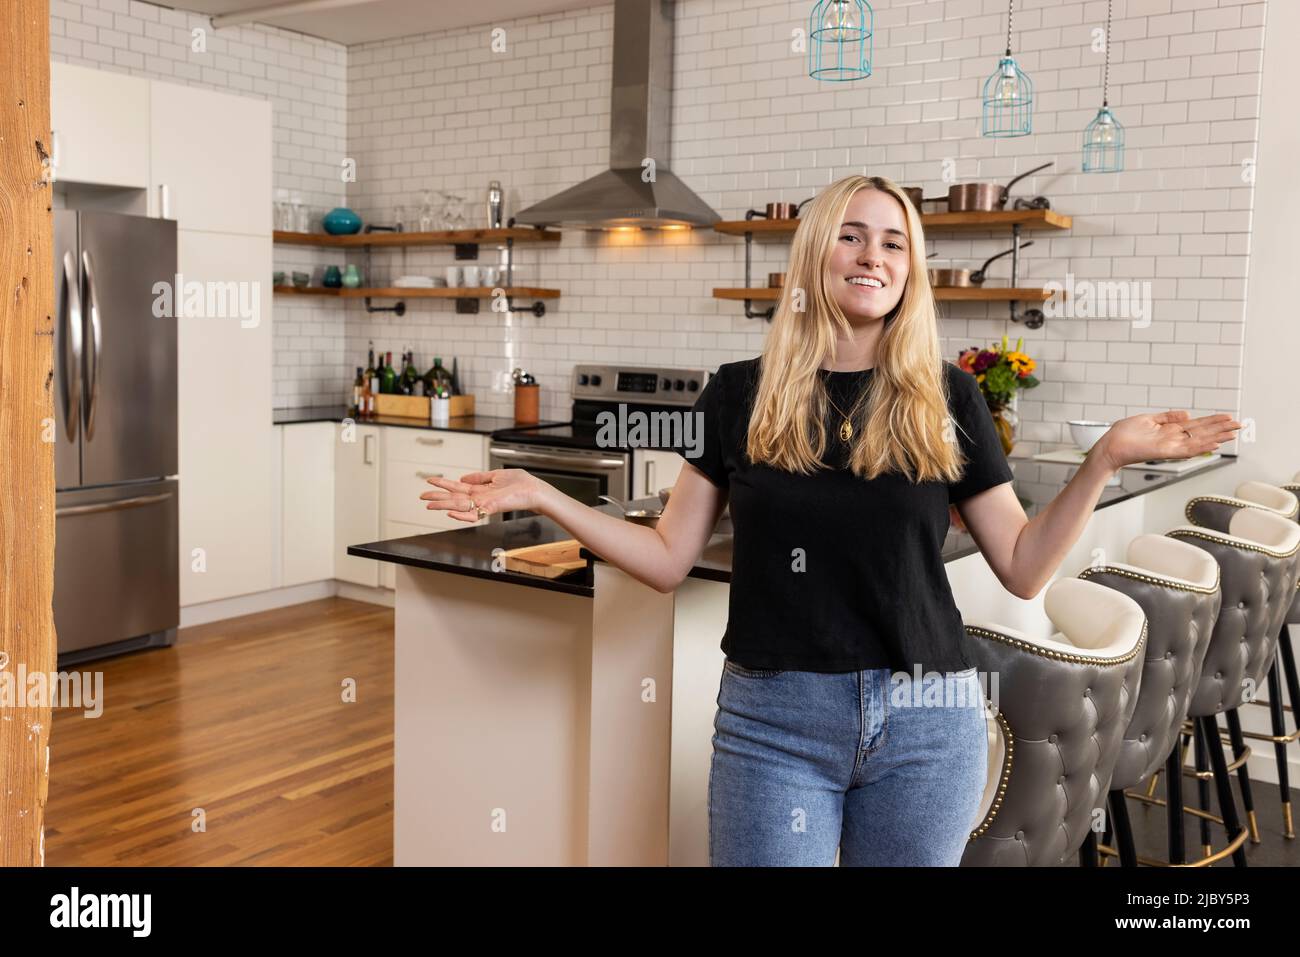 Portrait of a young woman standing in her home kitchen looking at camera with her arms out in a welcoming manner. Stock Photo